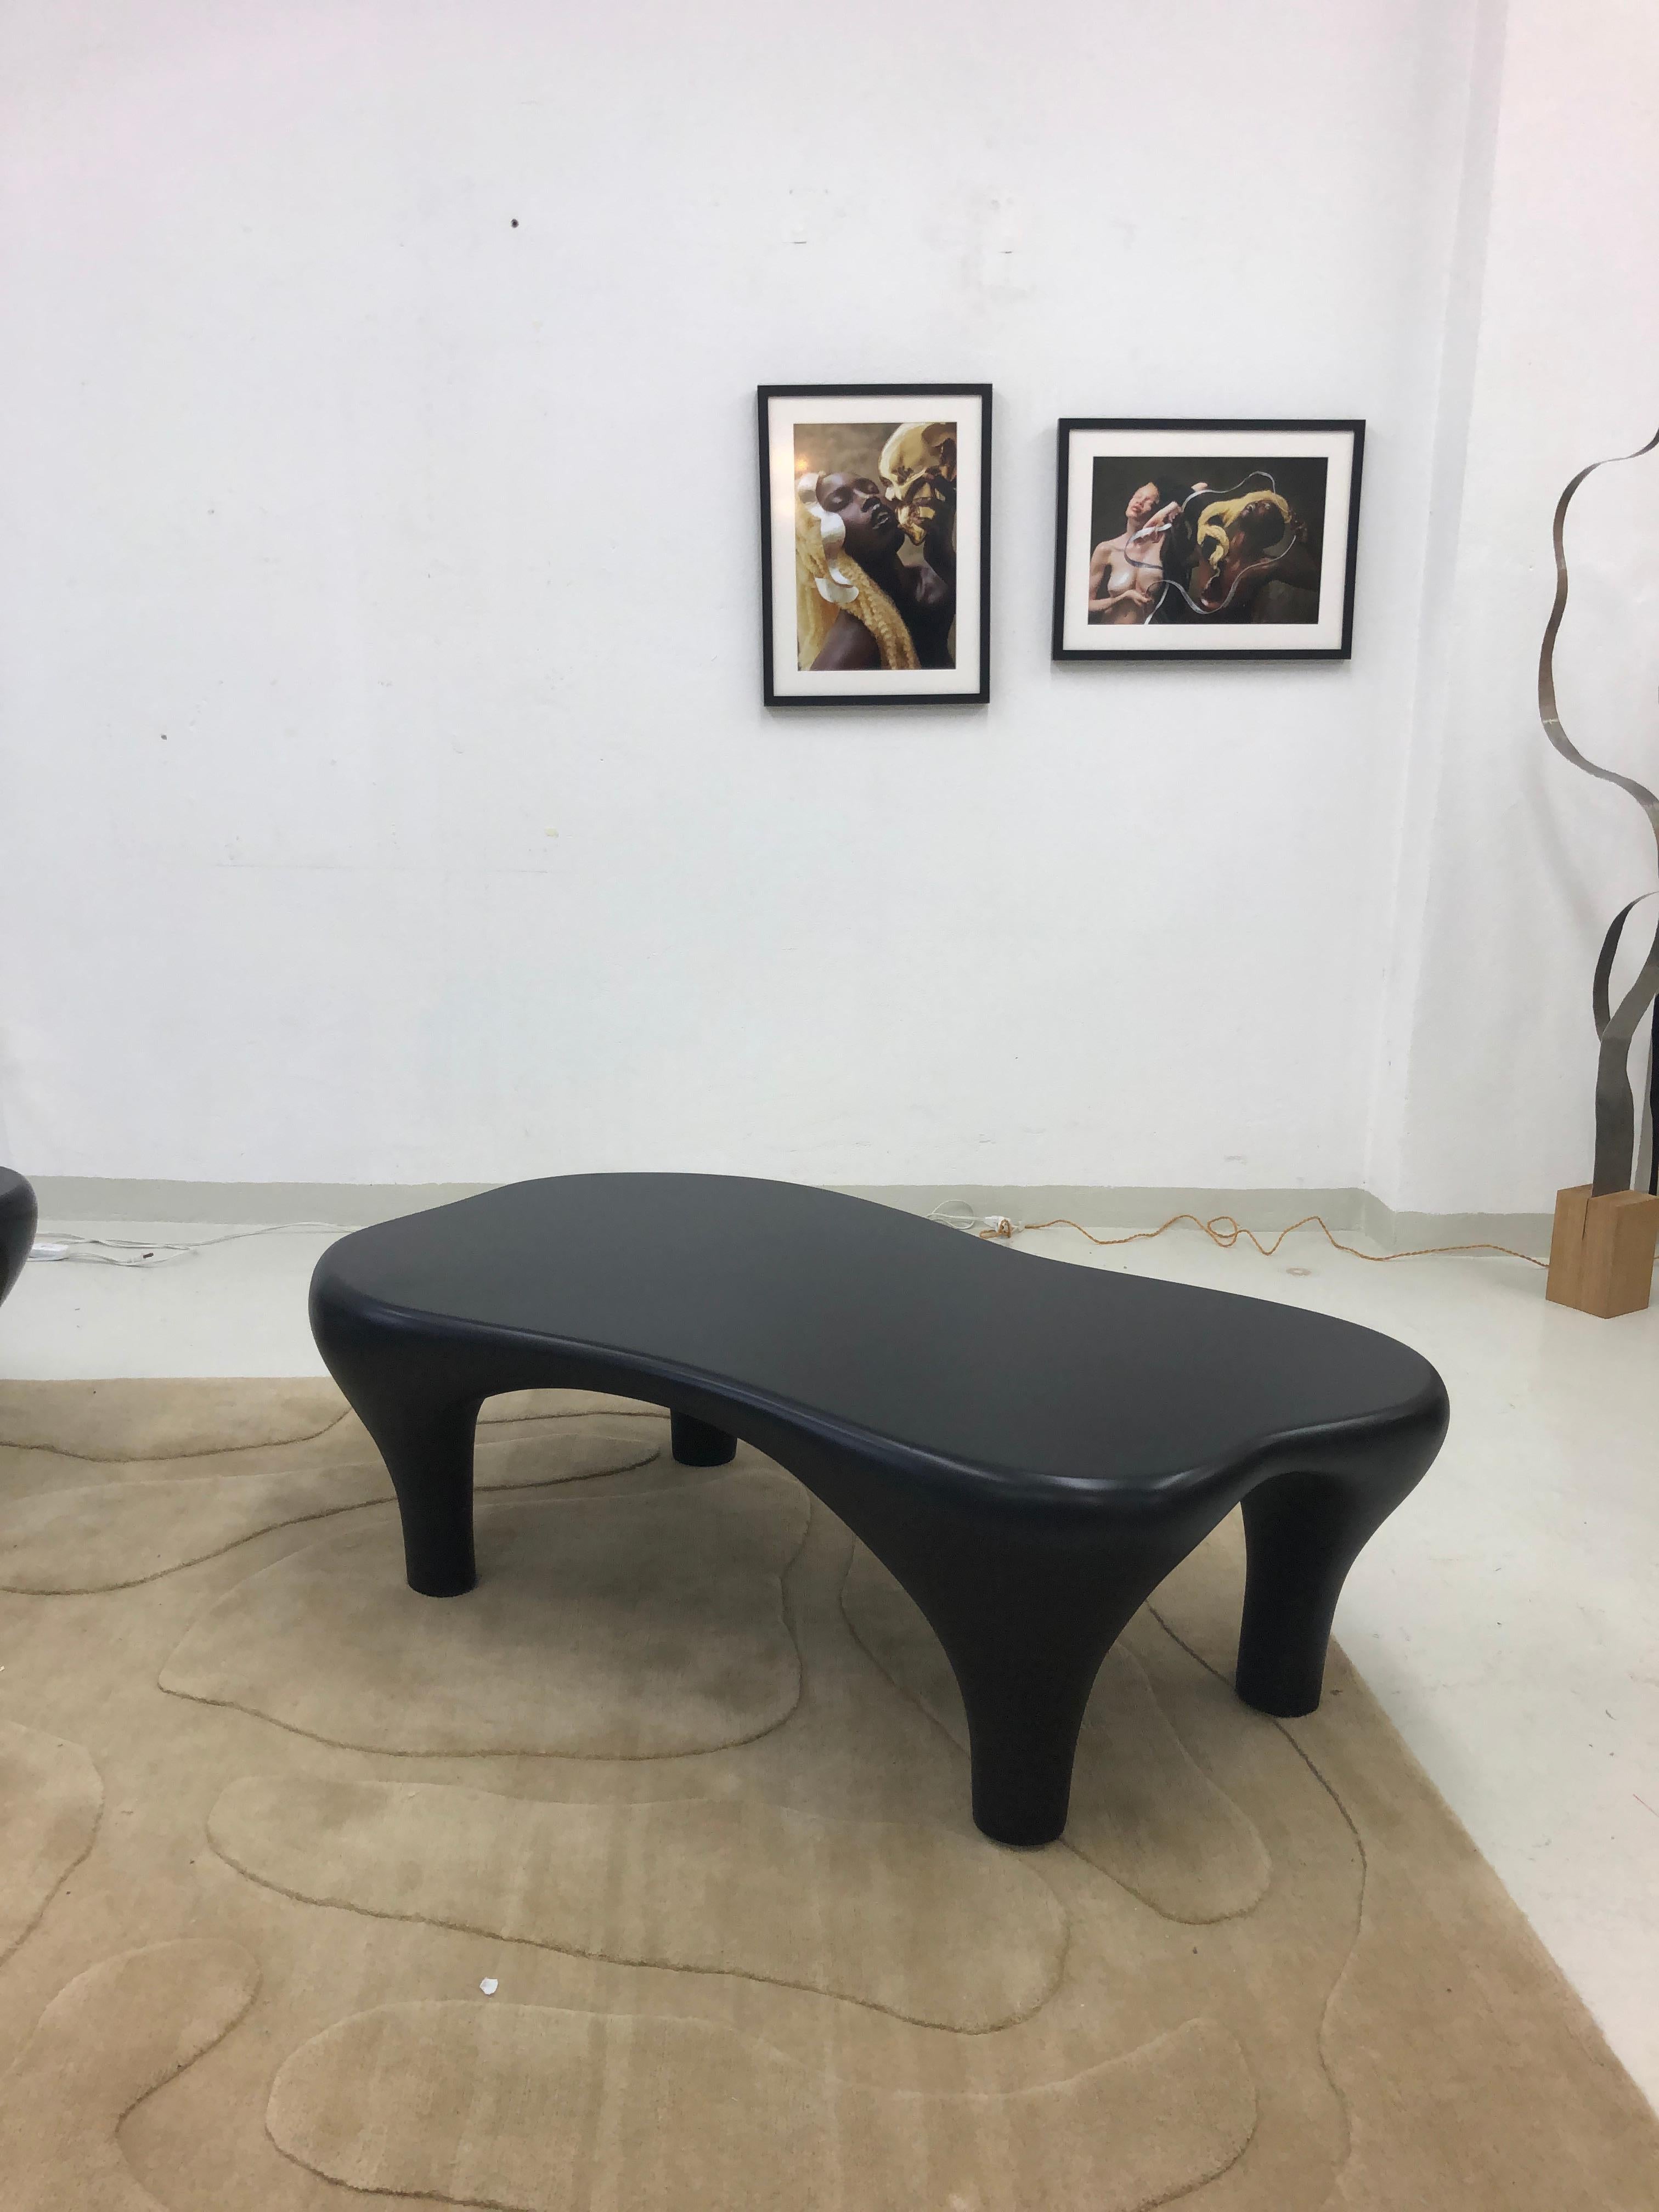 Sculptural coffee table finished with matte lacquer.
Sculpted by hand this anthropomorphic form feels alive and surprises the eye from all angles.